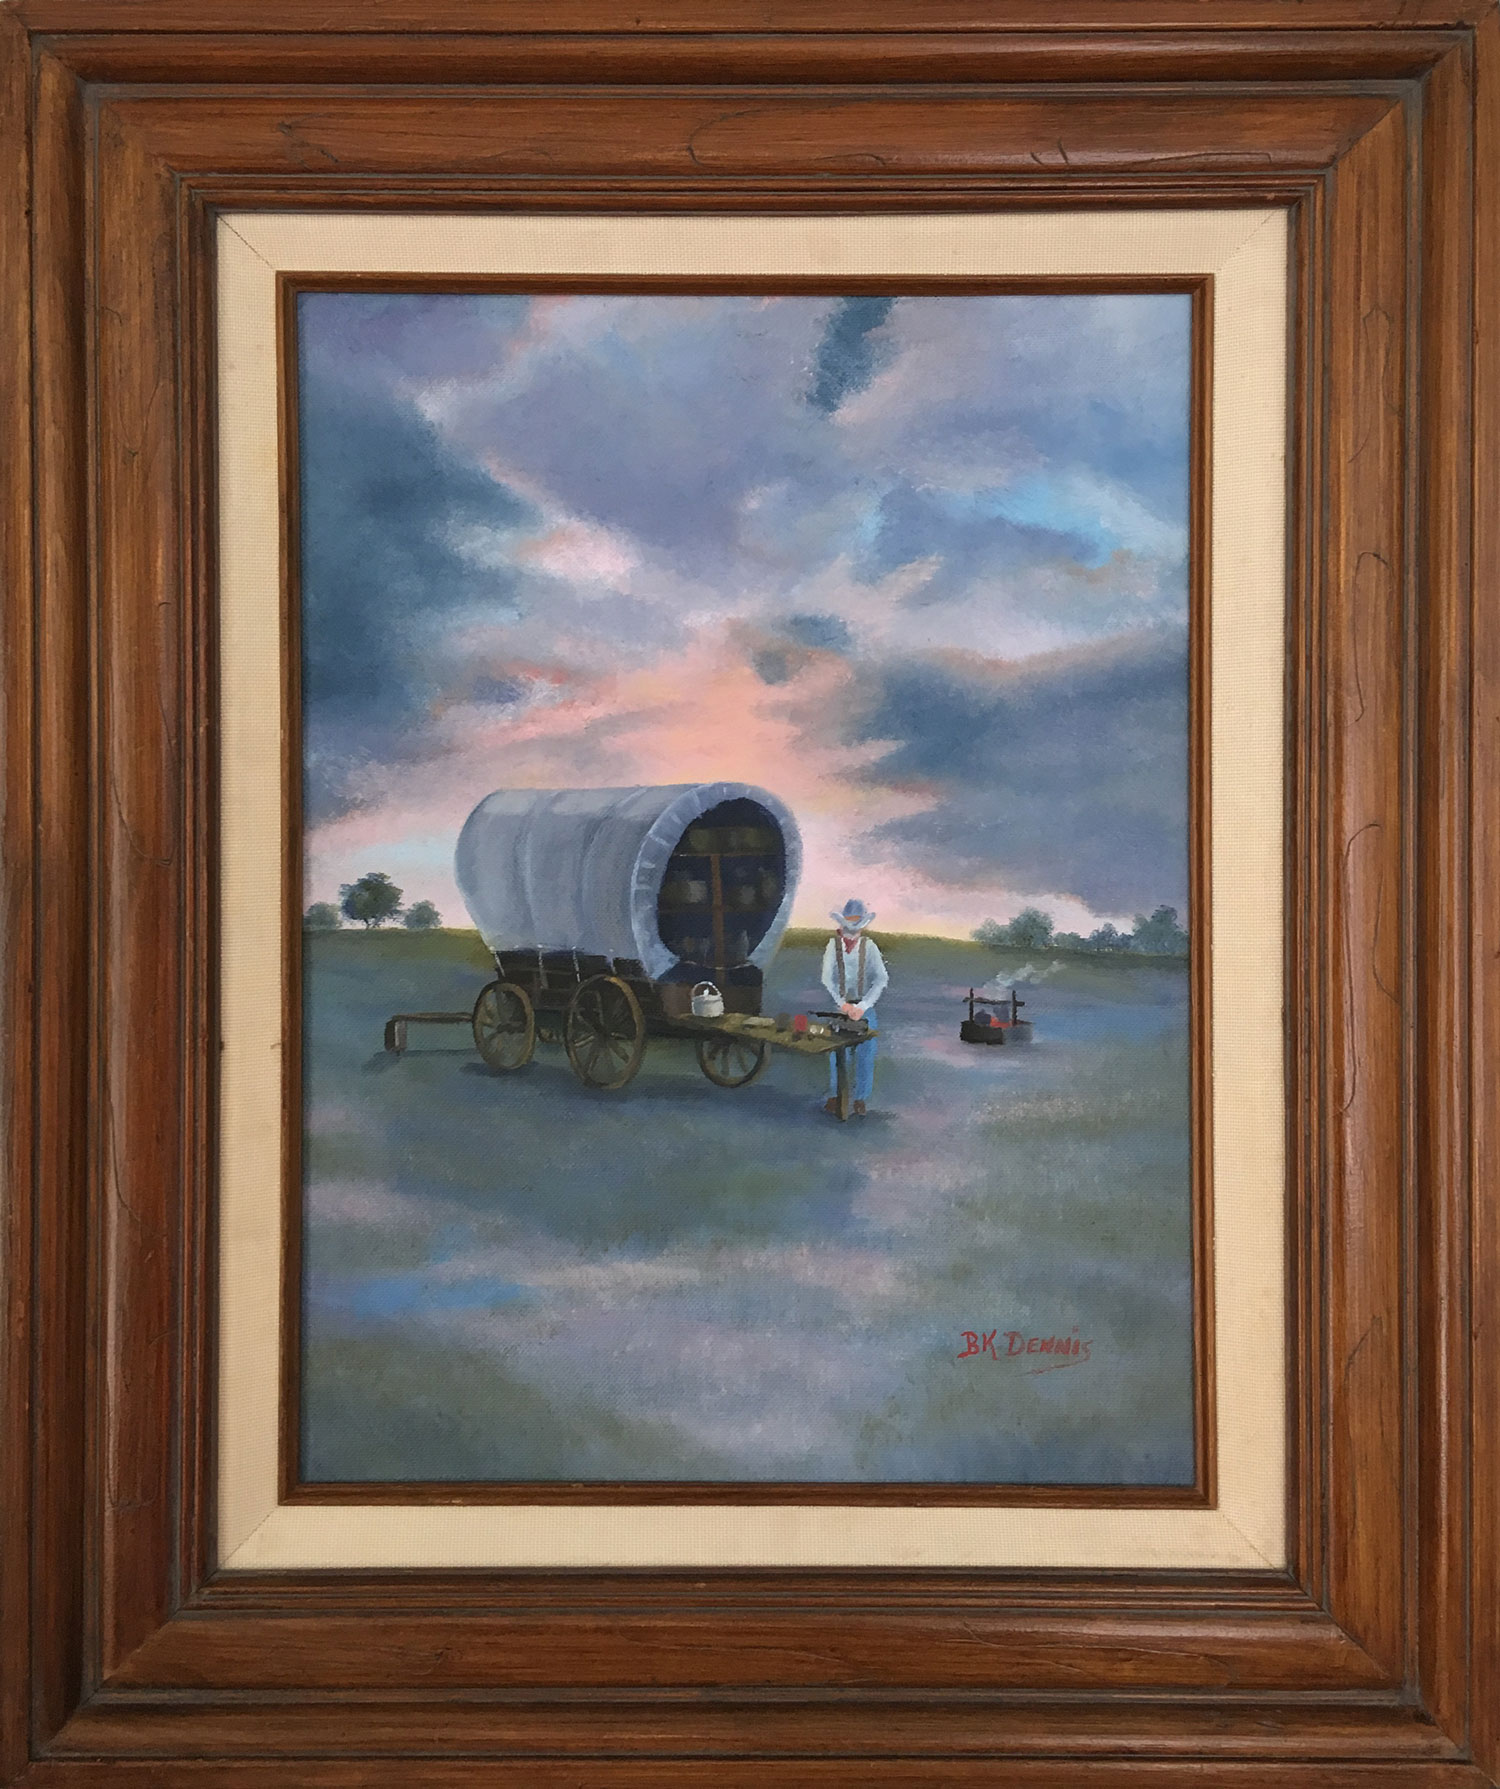 Oil painting by B.K. Dennis of a chuck wagon cook preparing a meal with a beautiful blue and pink cloudy sky in the background.